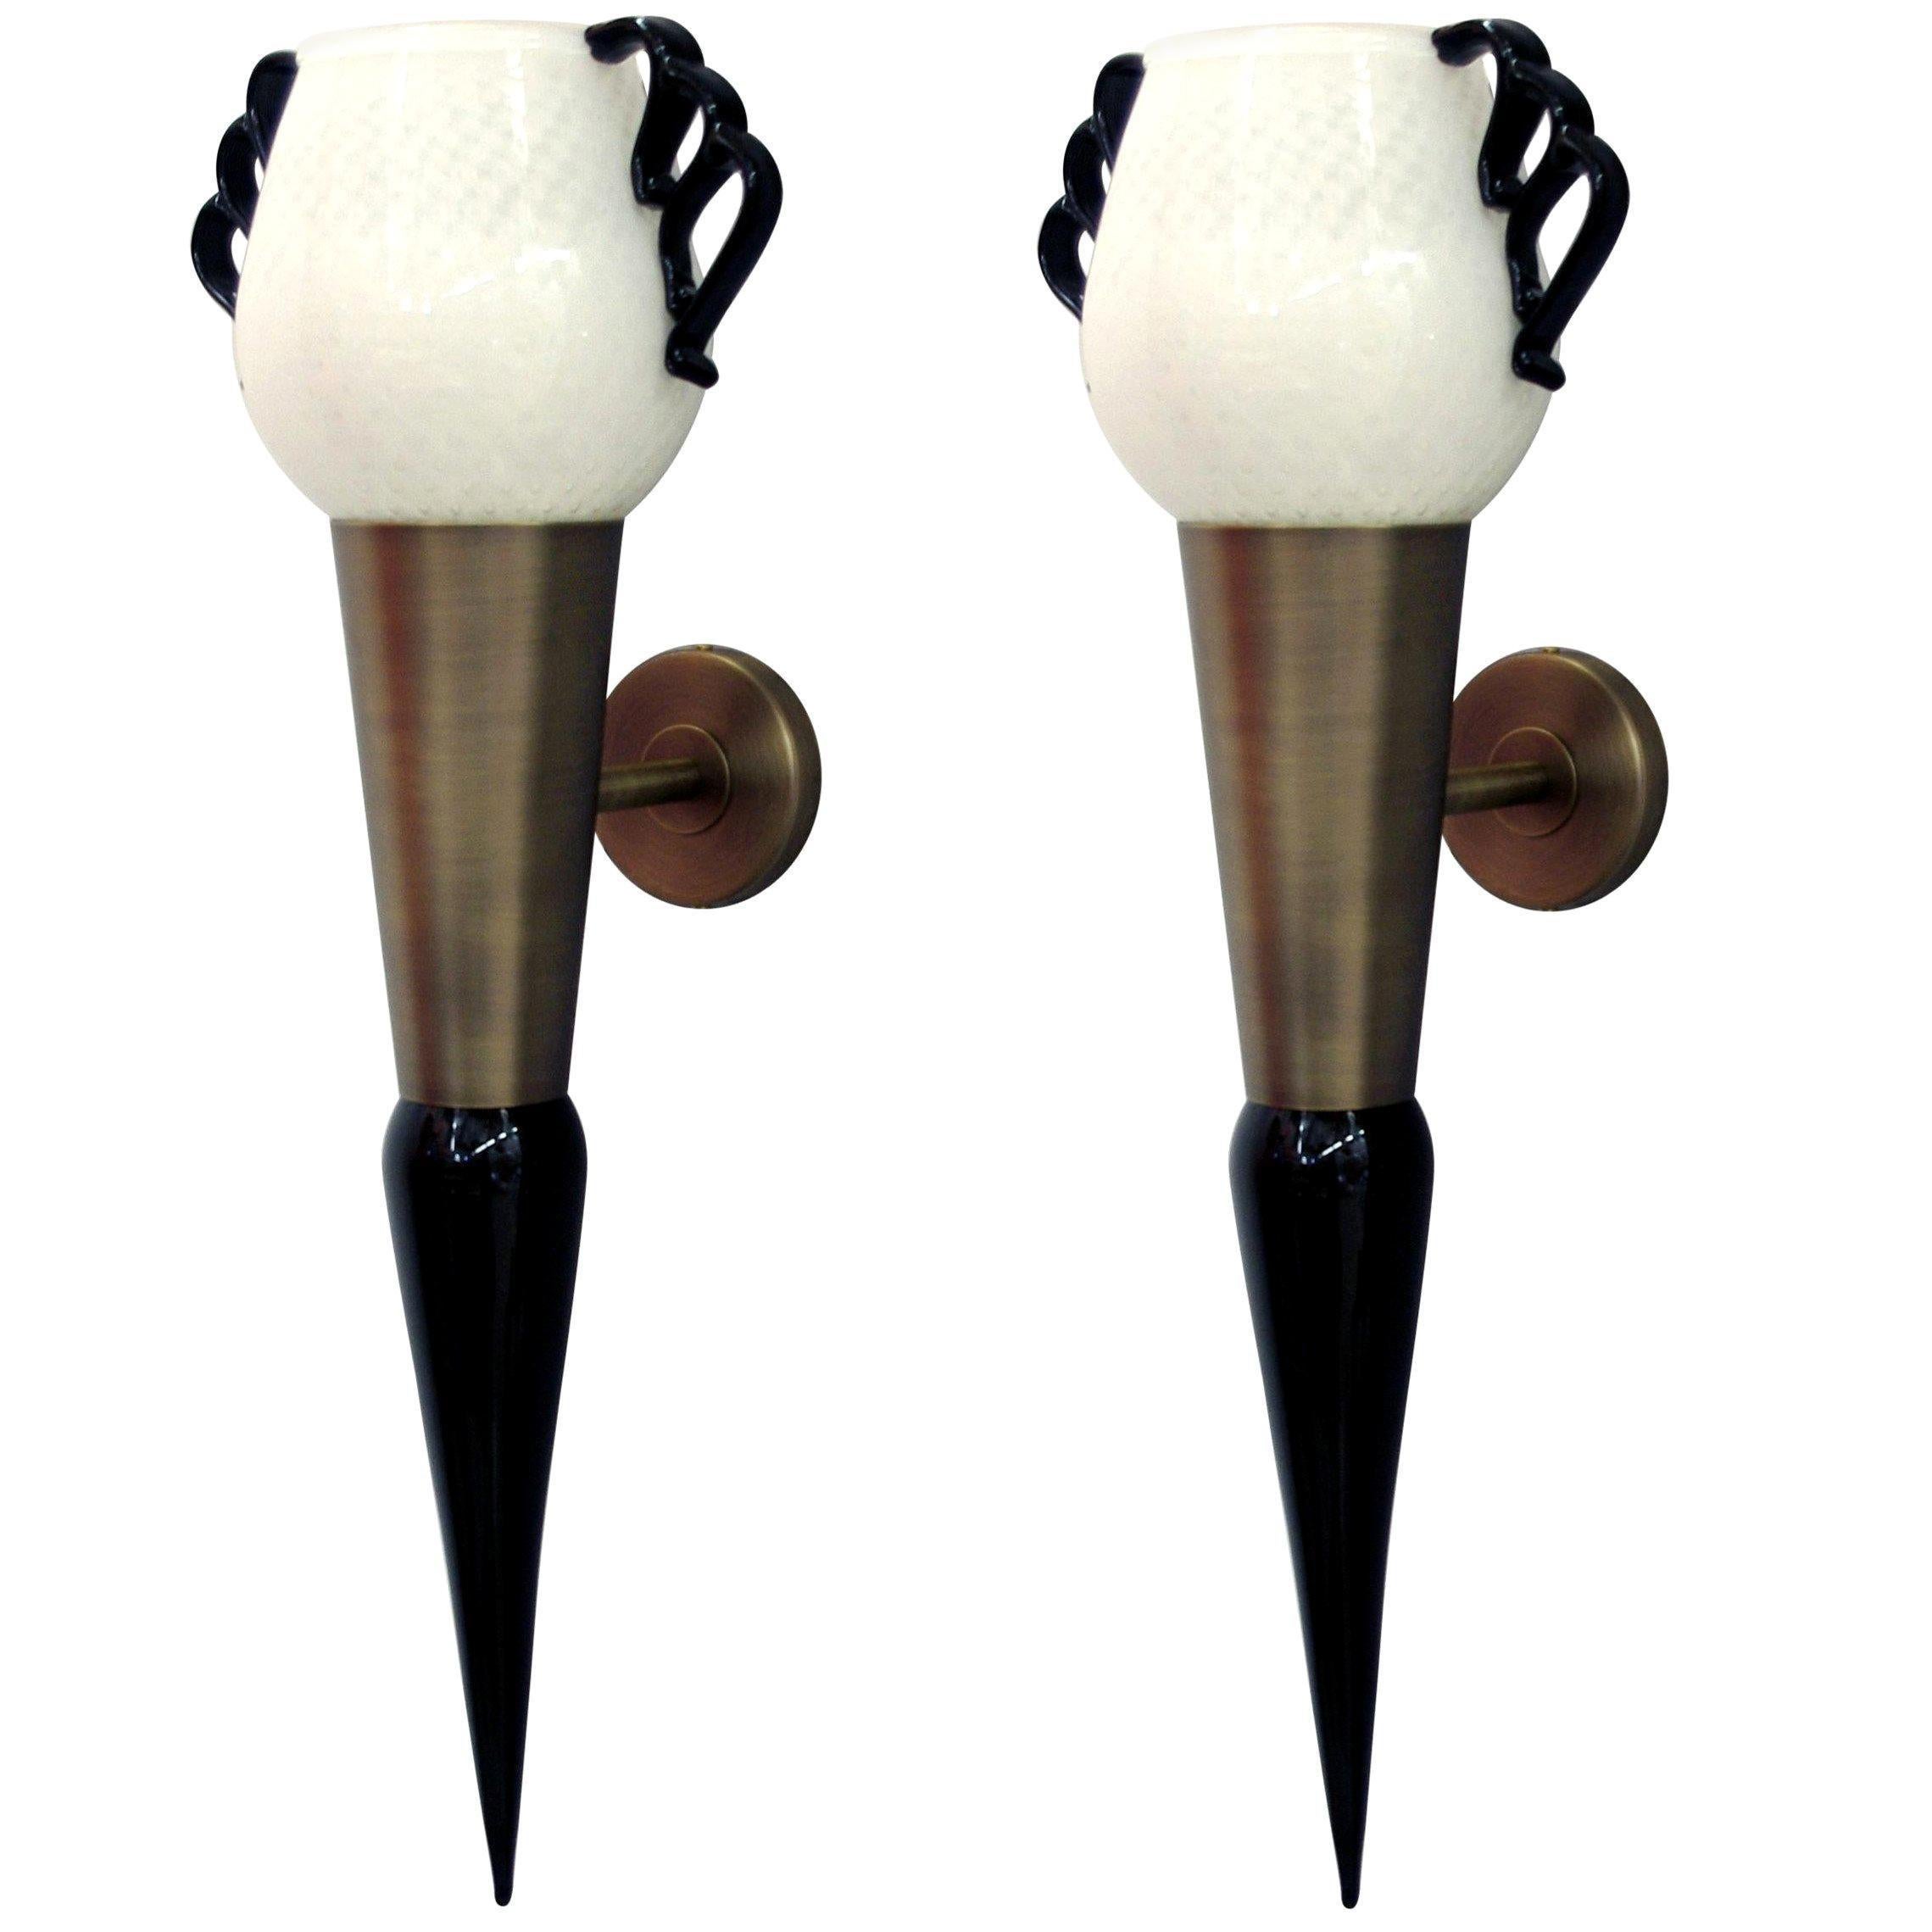 One of a Kind Pair of Italian Sconces w/ Milky White Murano Glass, 1990s For Sale